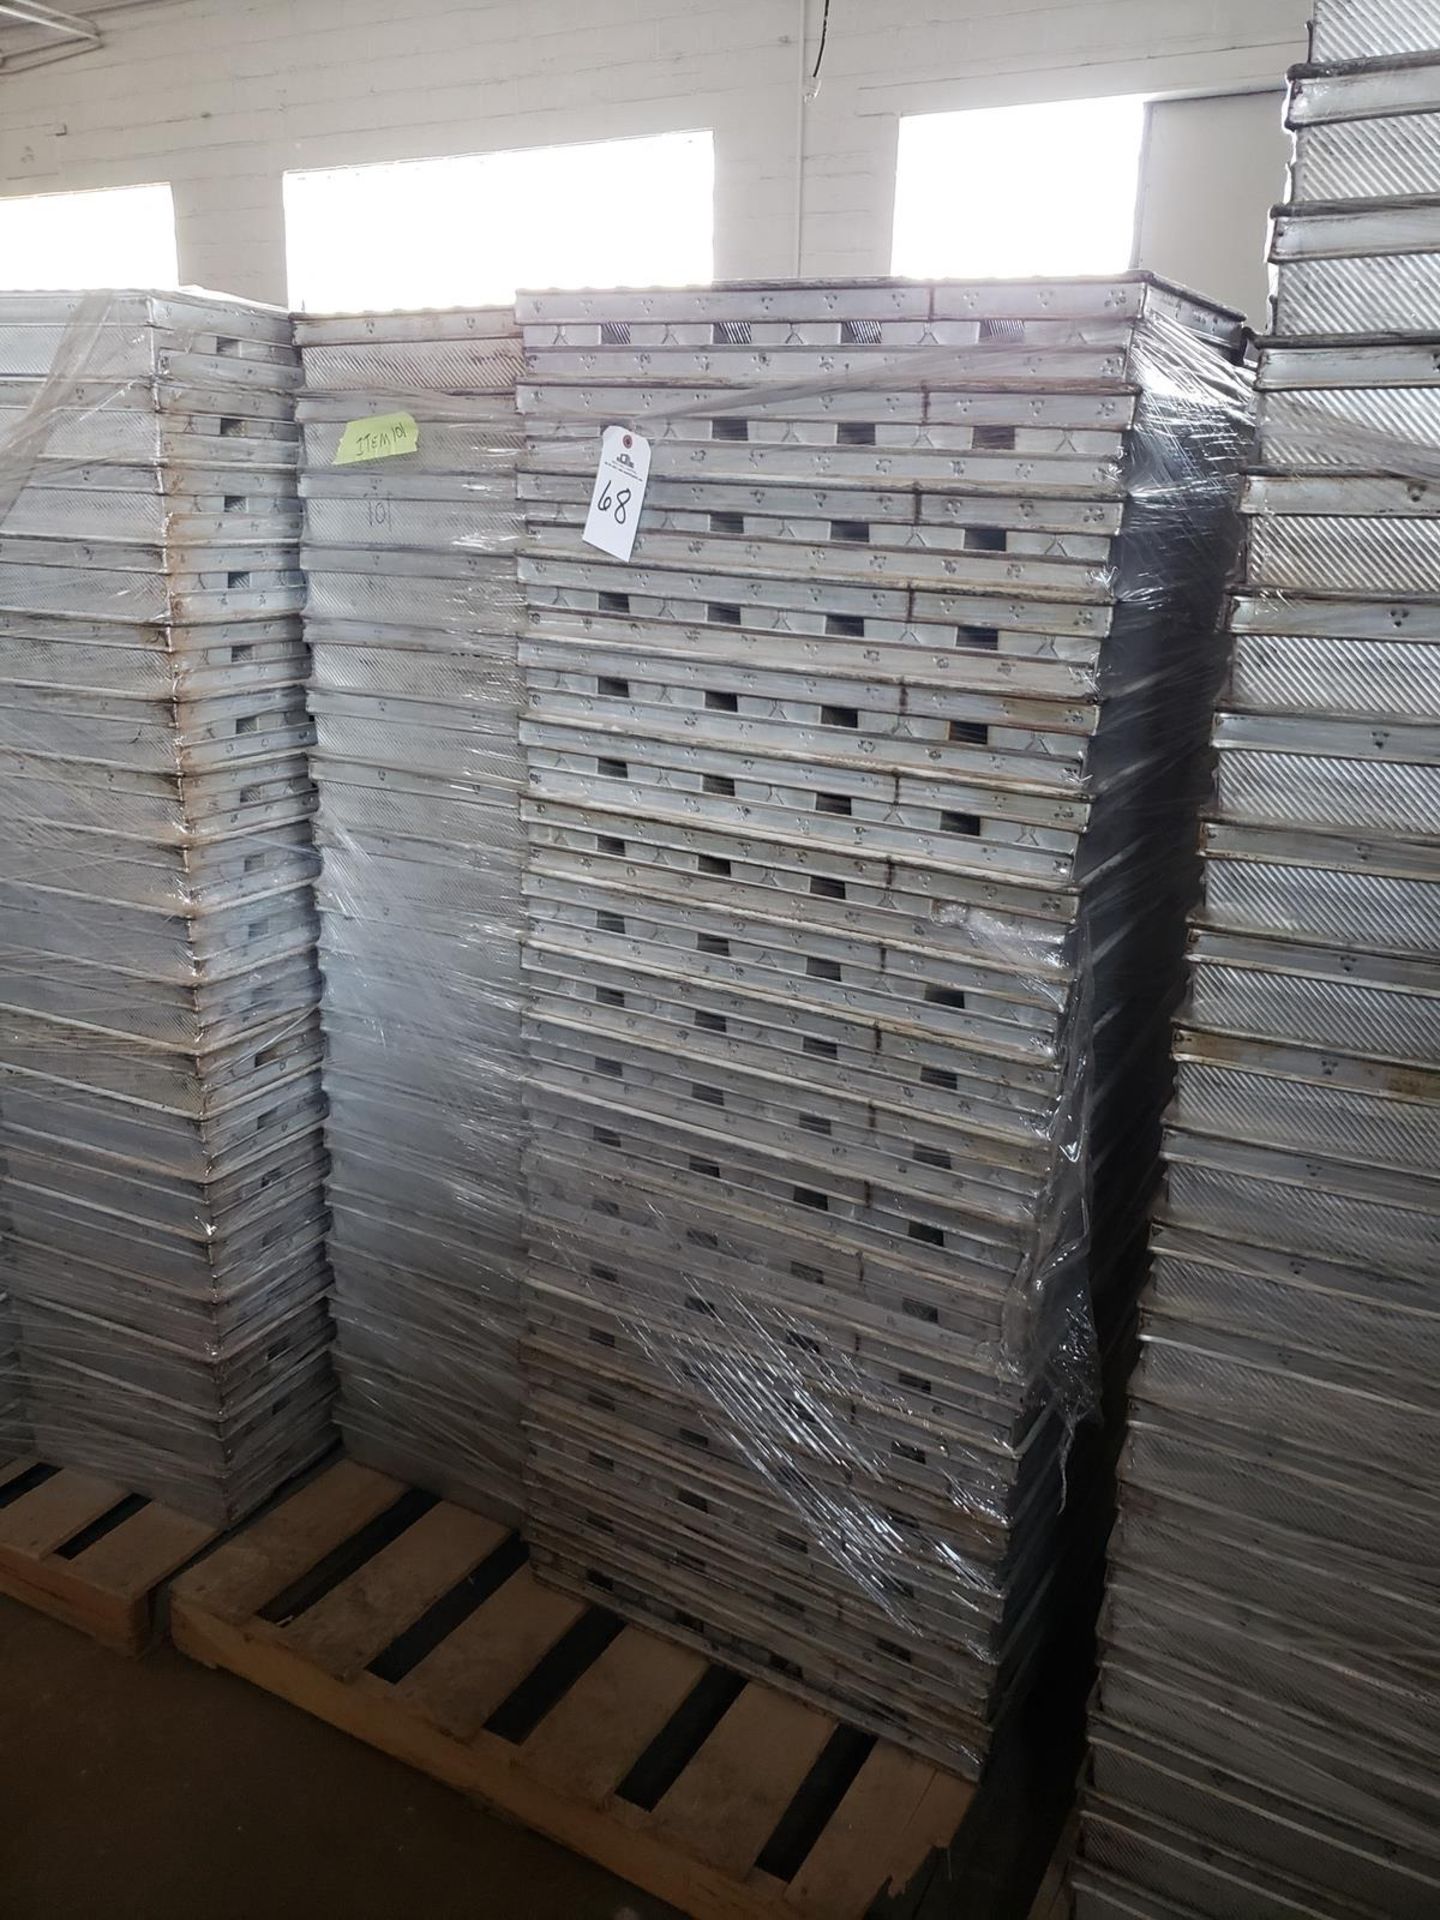 Lot of approx. 54 4 1/2" X 16" 5 Strap Bread Baking Pans | Rig Fee: $50